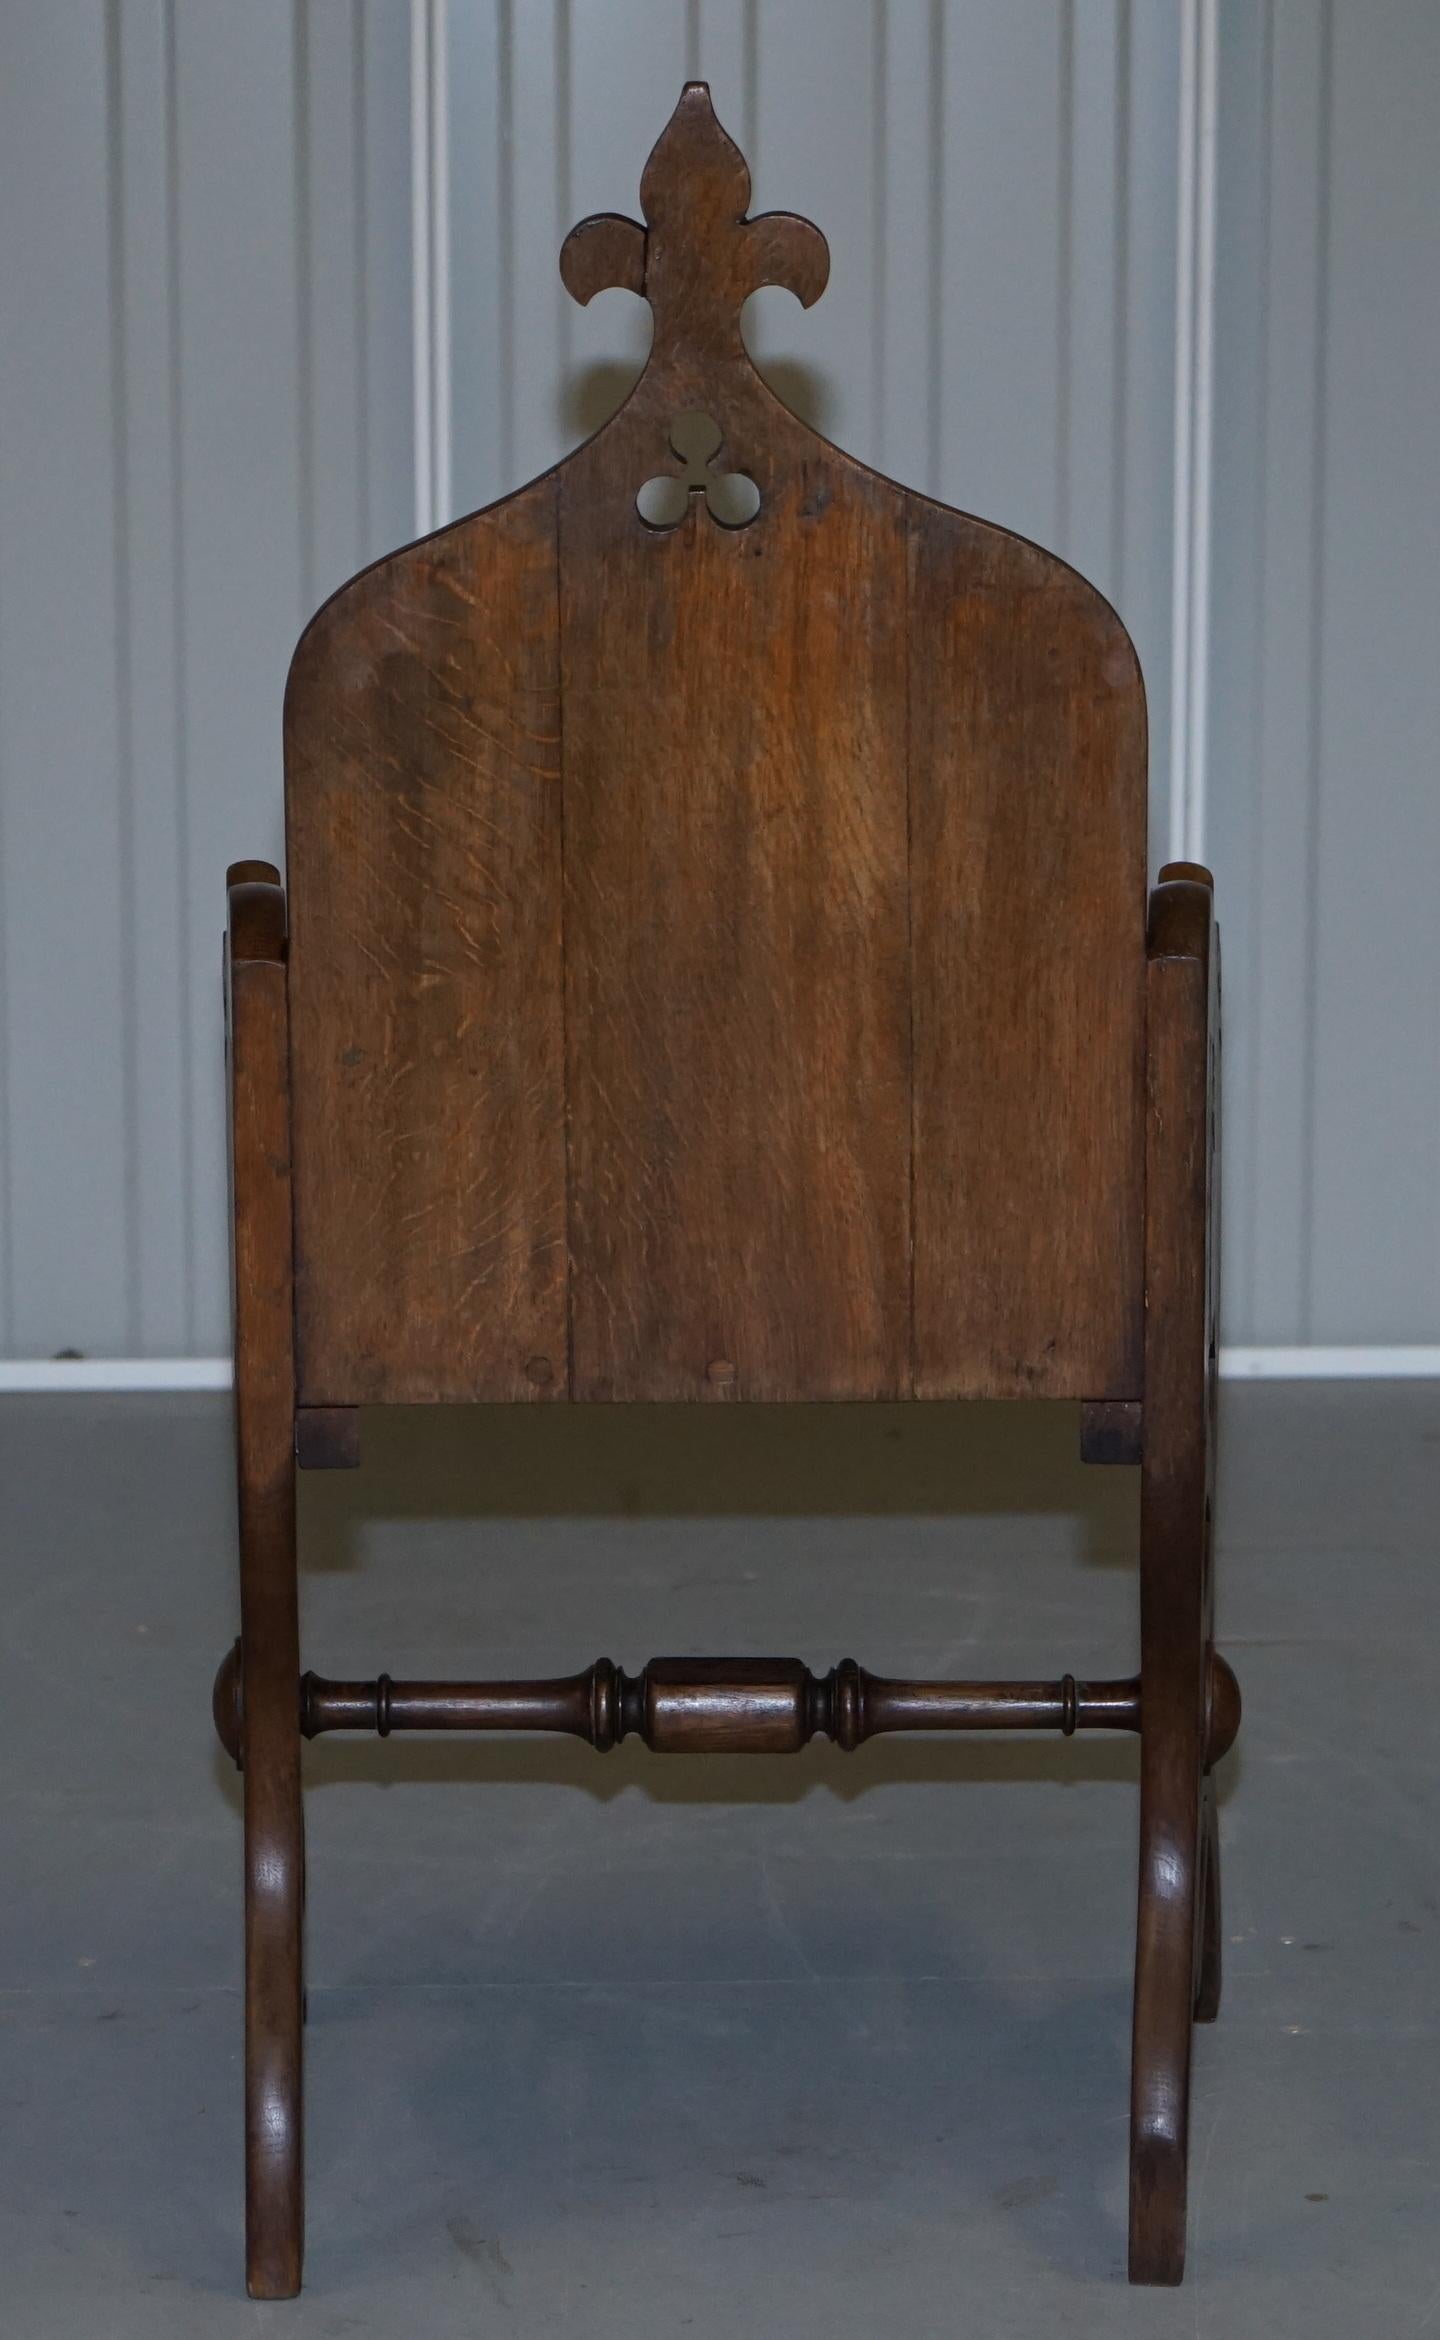 Original Criddle & Smith Stamped Victorian Walnut Gothic Revival Church Armchair For Sale 5